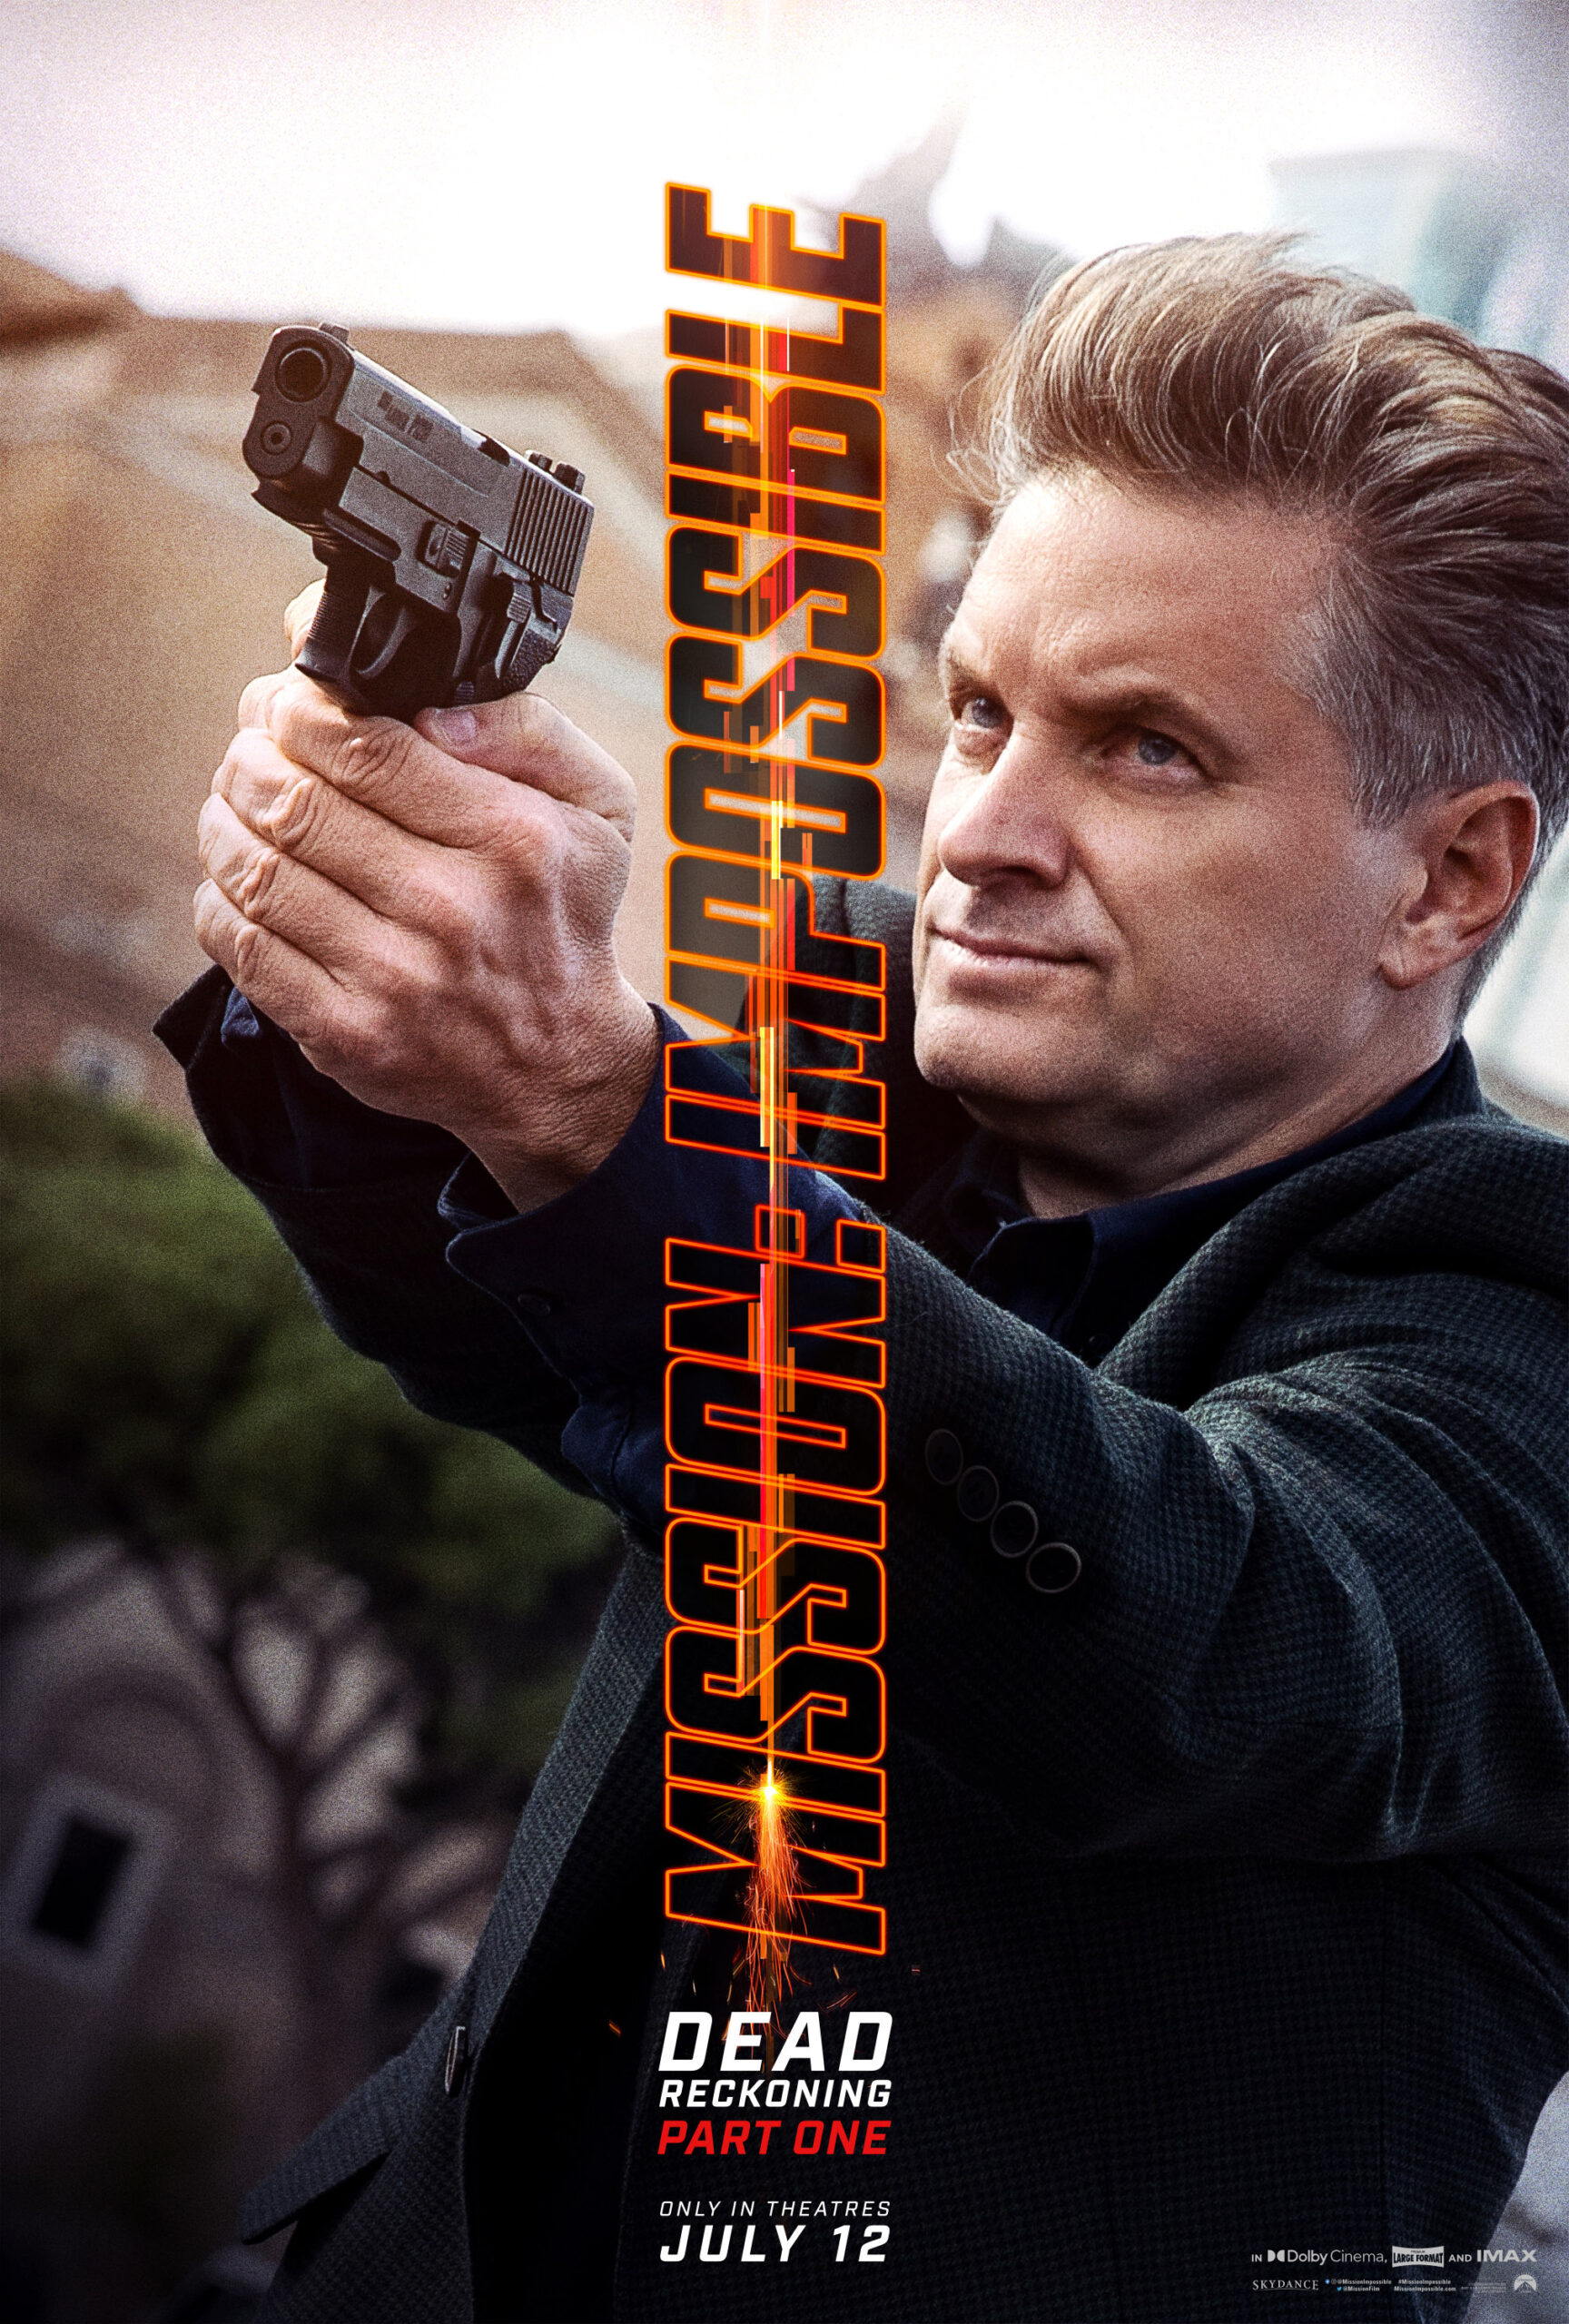 Mission: Impossible - Dead Reckoning Part One character poster (Paramount Pictures)